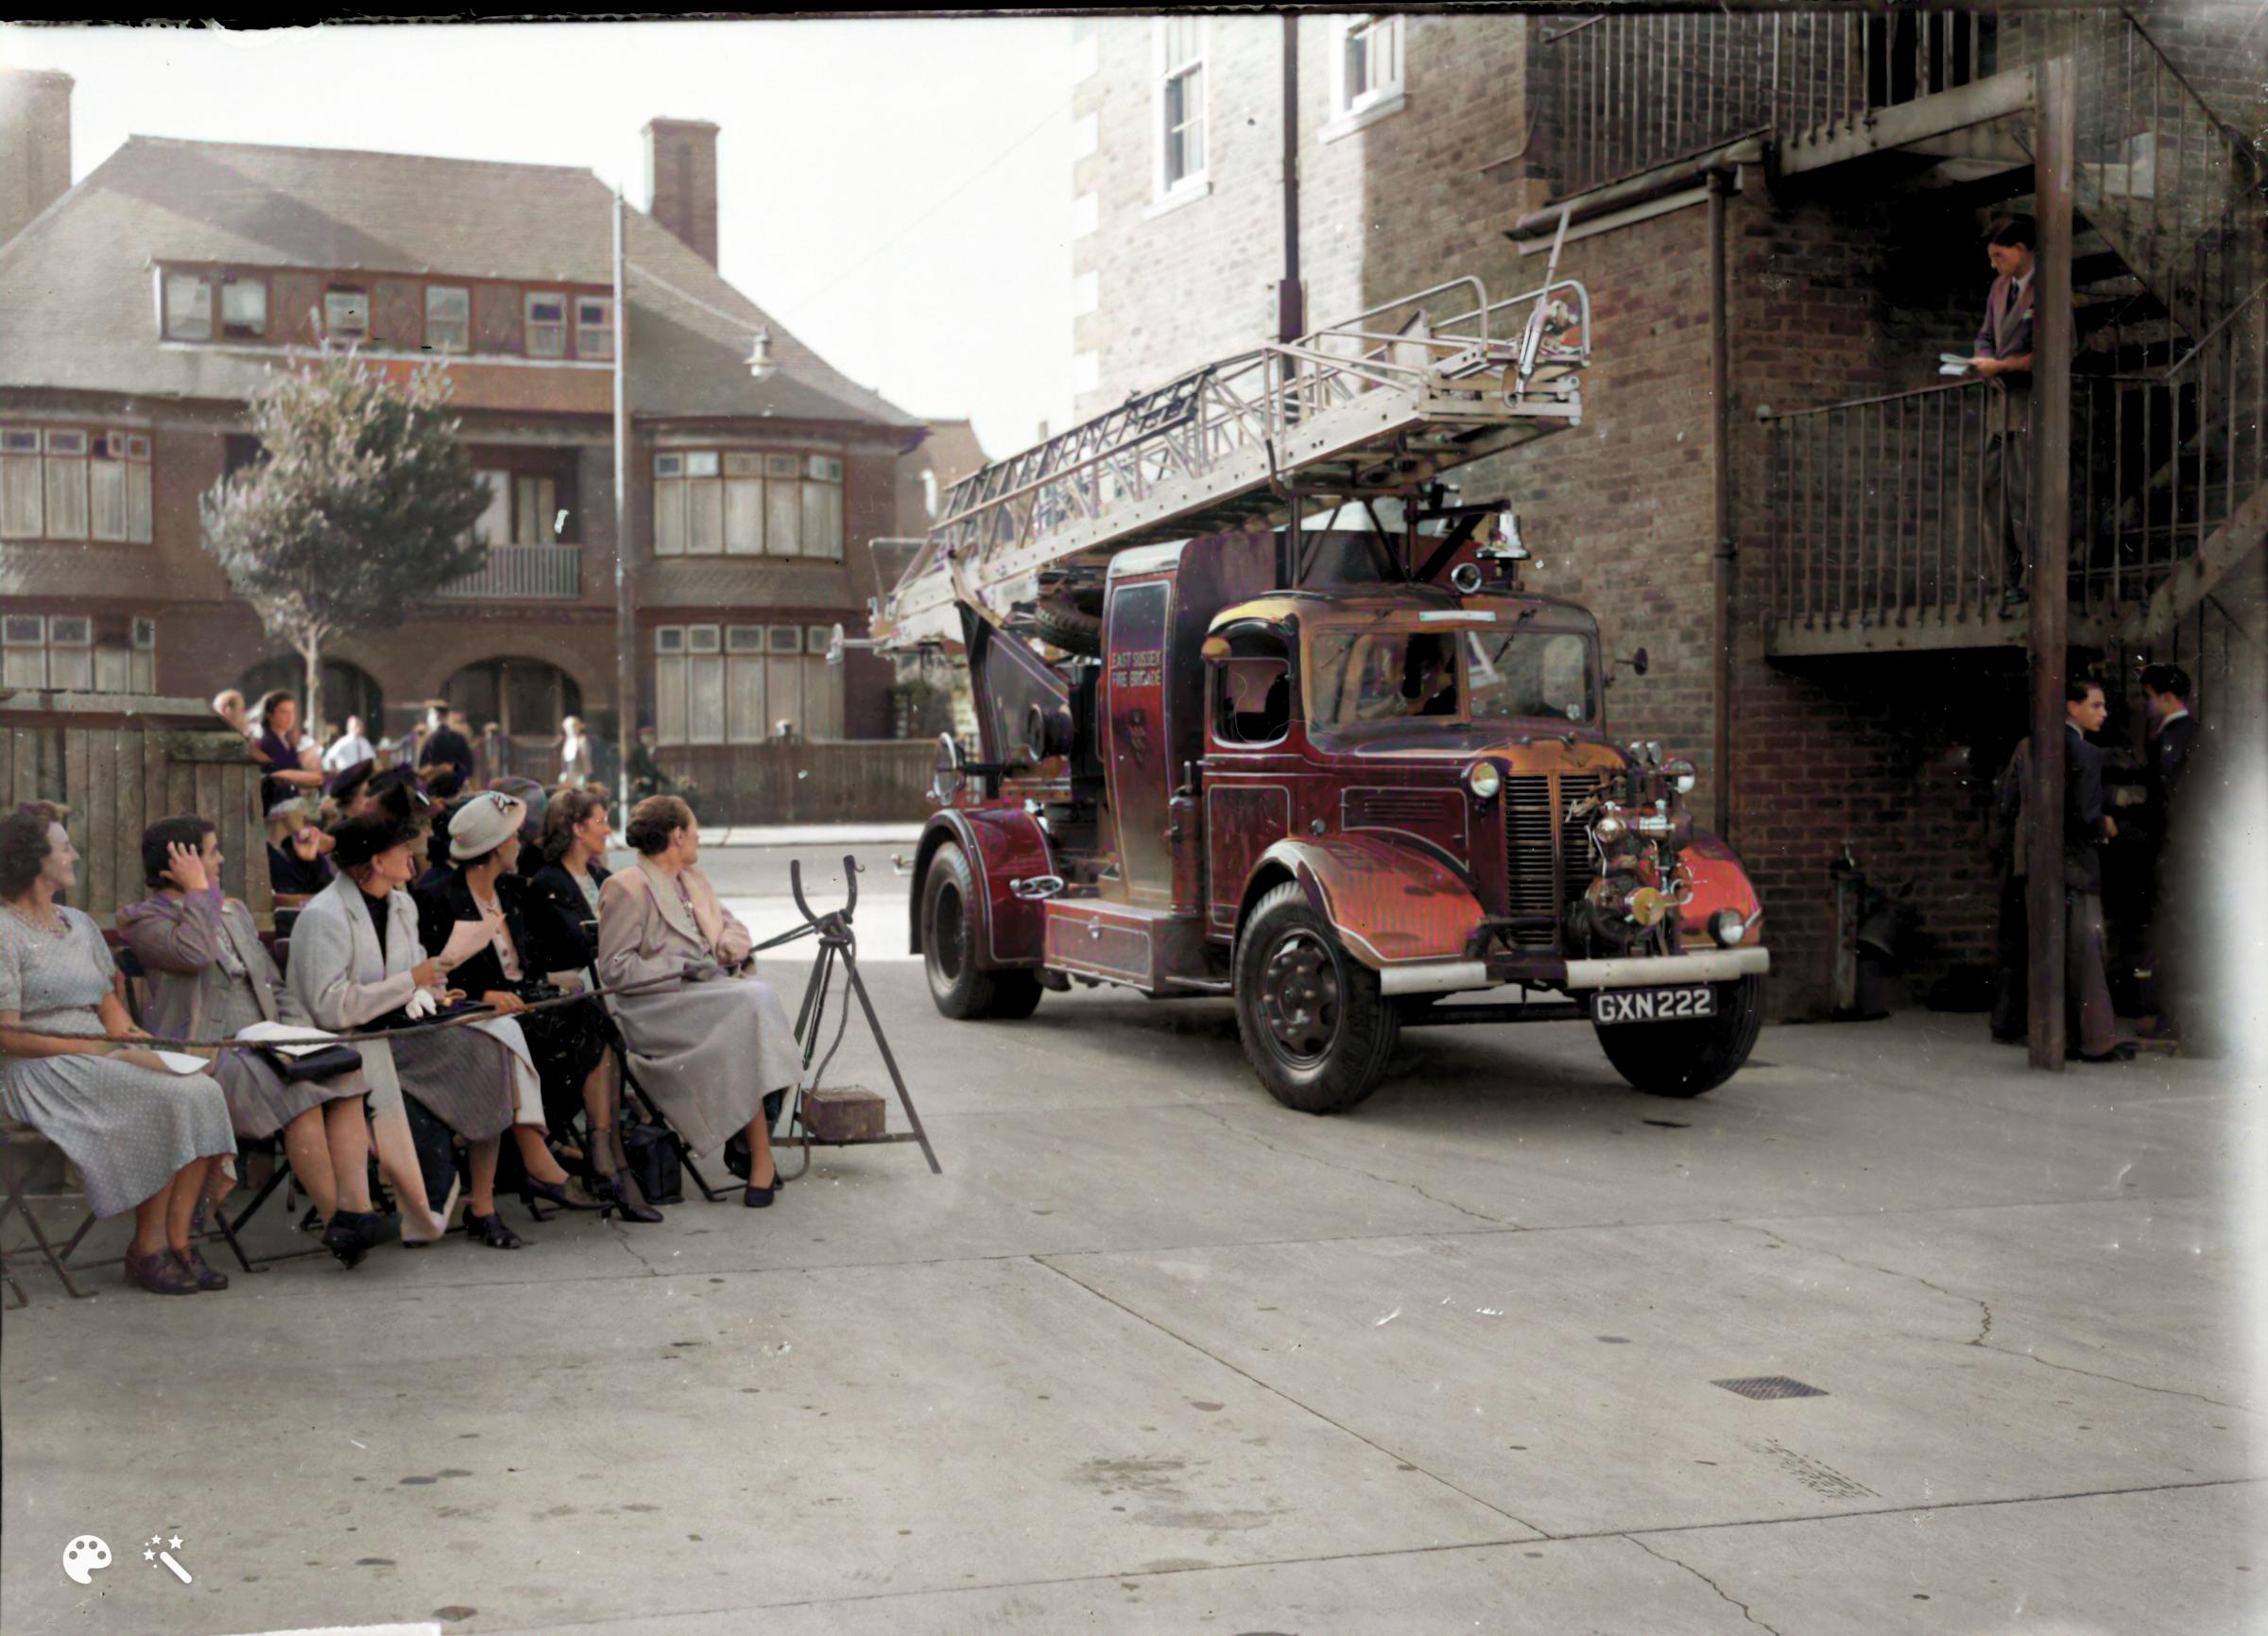 Admiring the fire engines at Hove Fire Station circa 1953